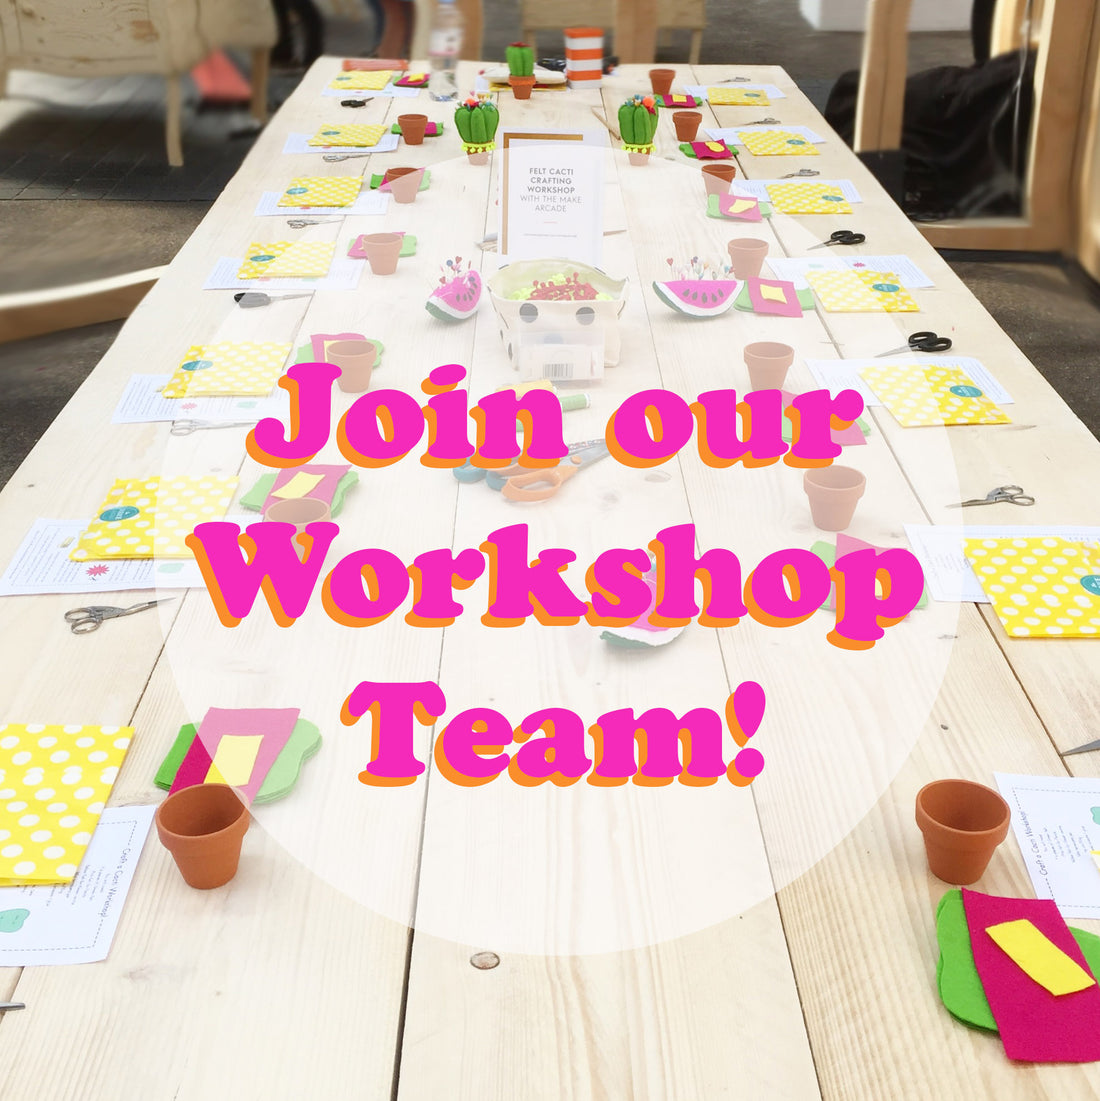 We are Hiring - Join our Workshop Team!